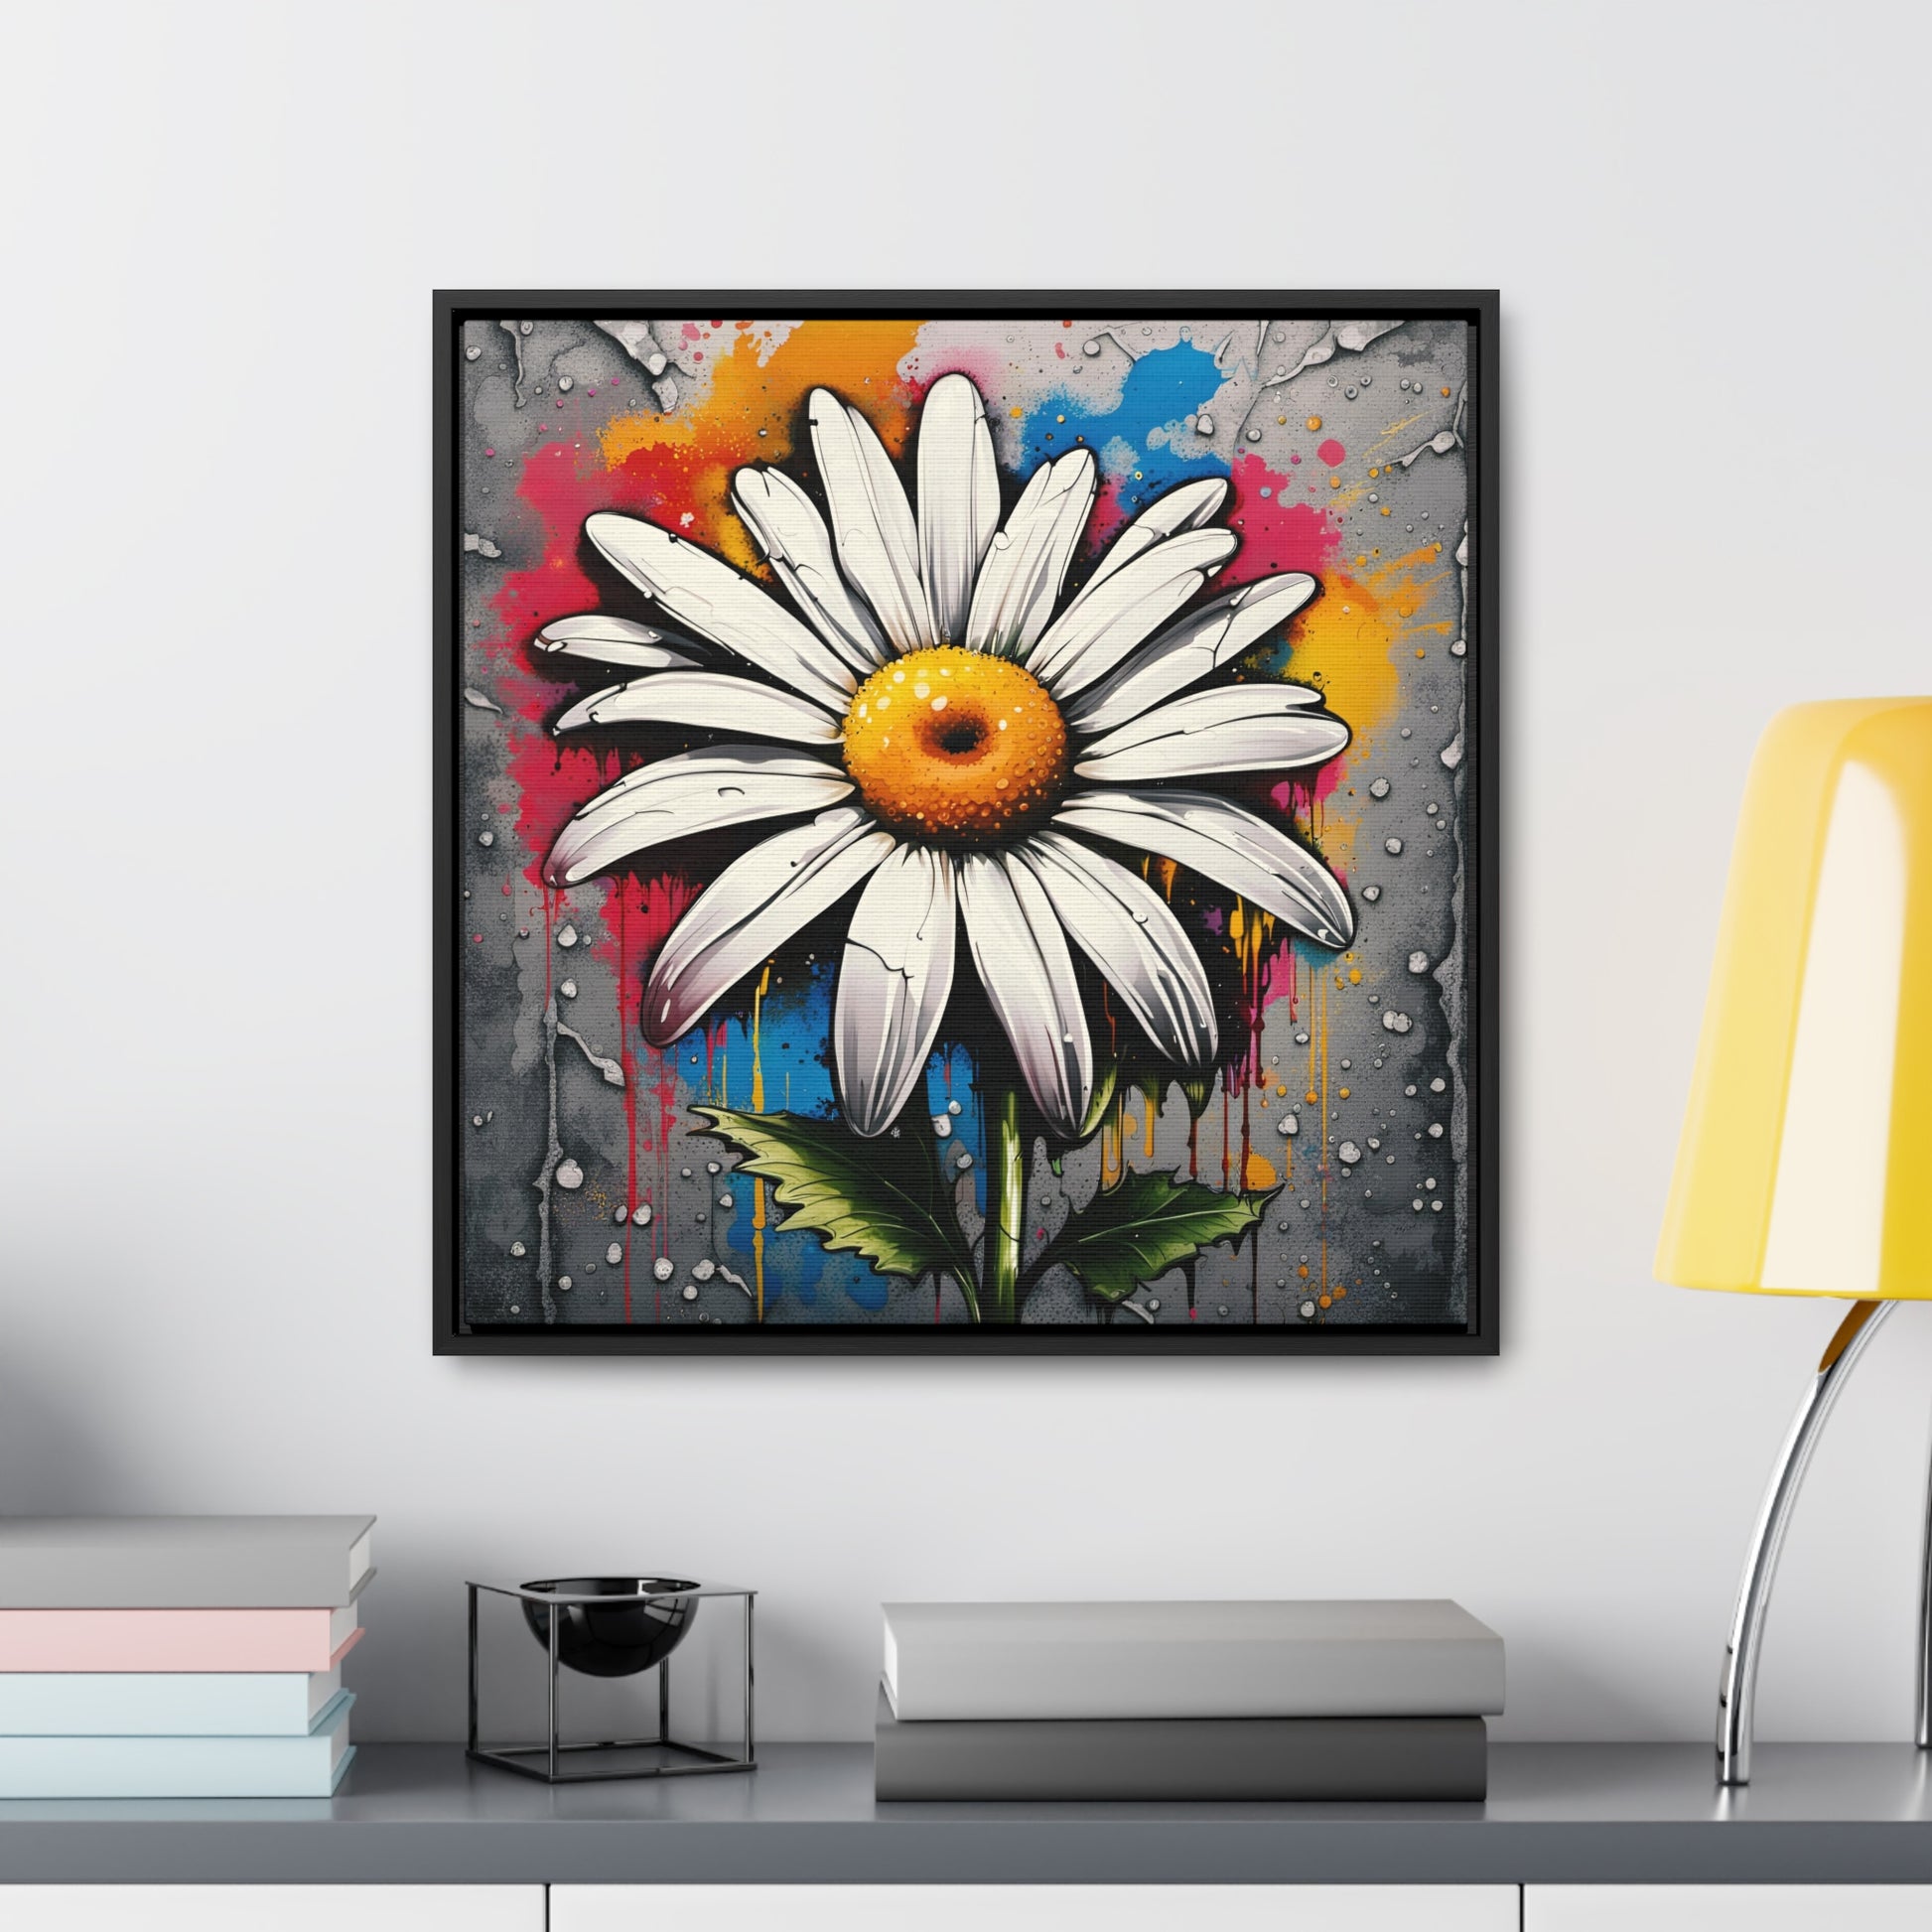 Floral themed Wall Art Print - Street Art Style Graffiti Daisy Printed on Canvas in a Floating Frame 20x20